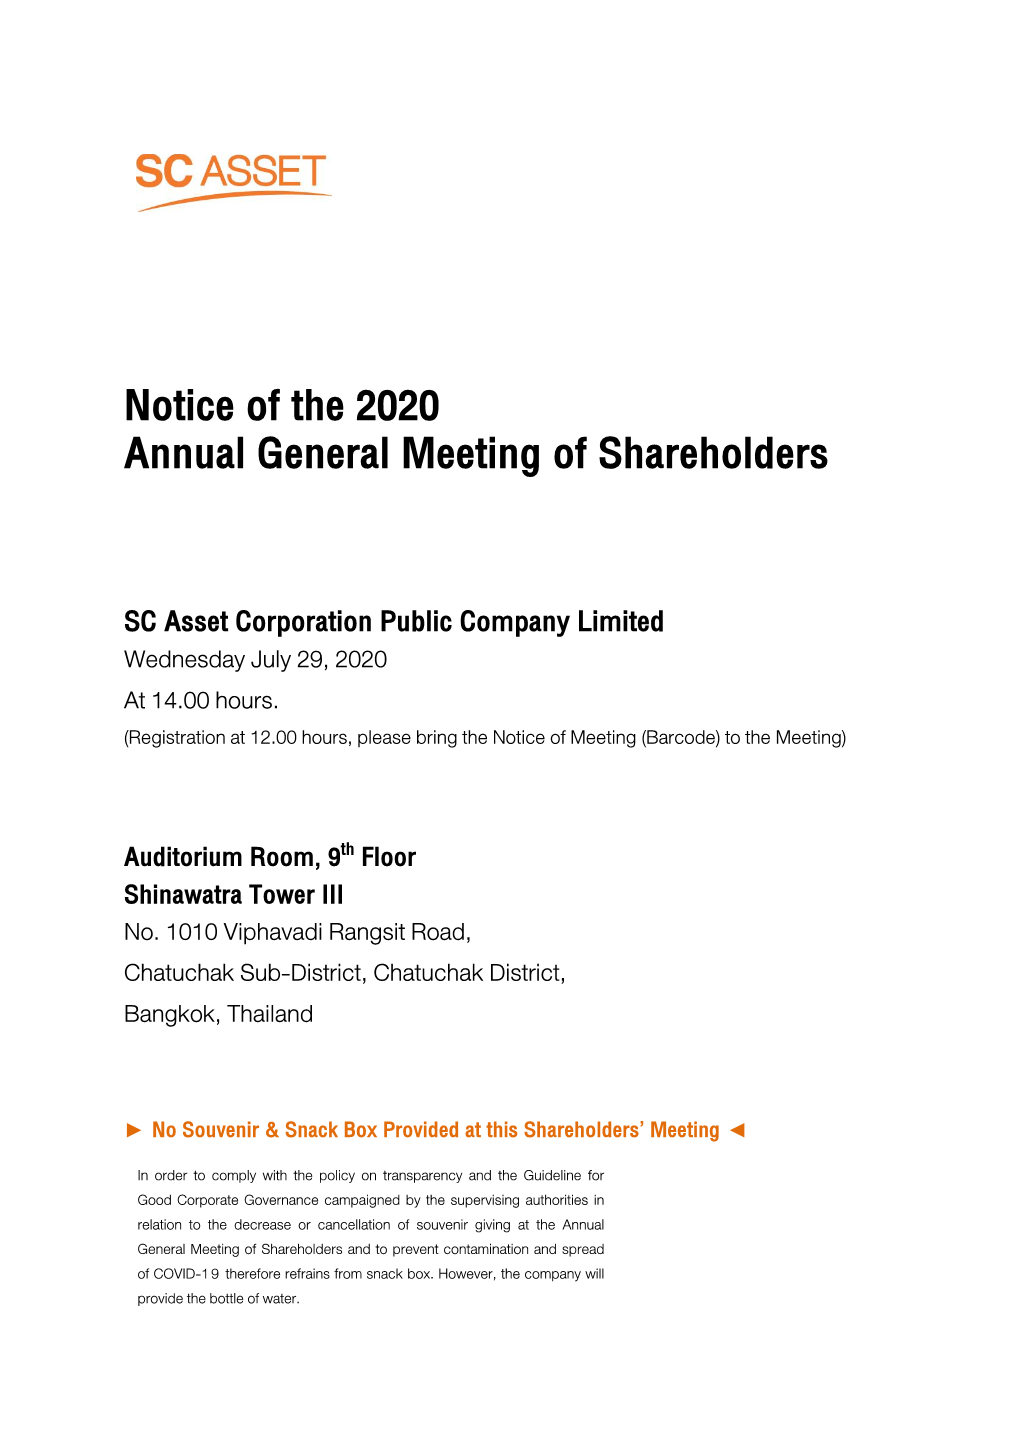 Notice of the 2020 Annual General Meeting of Shareholders